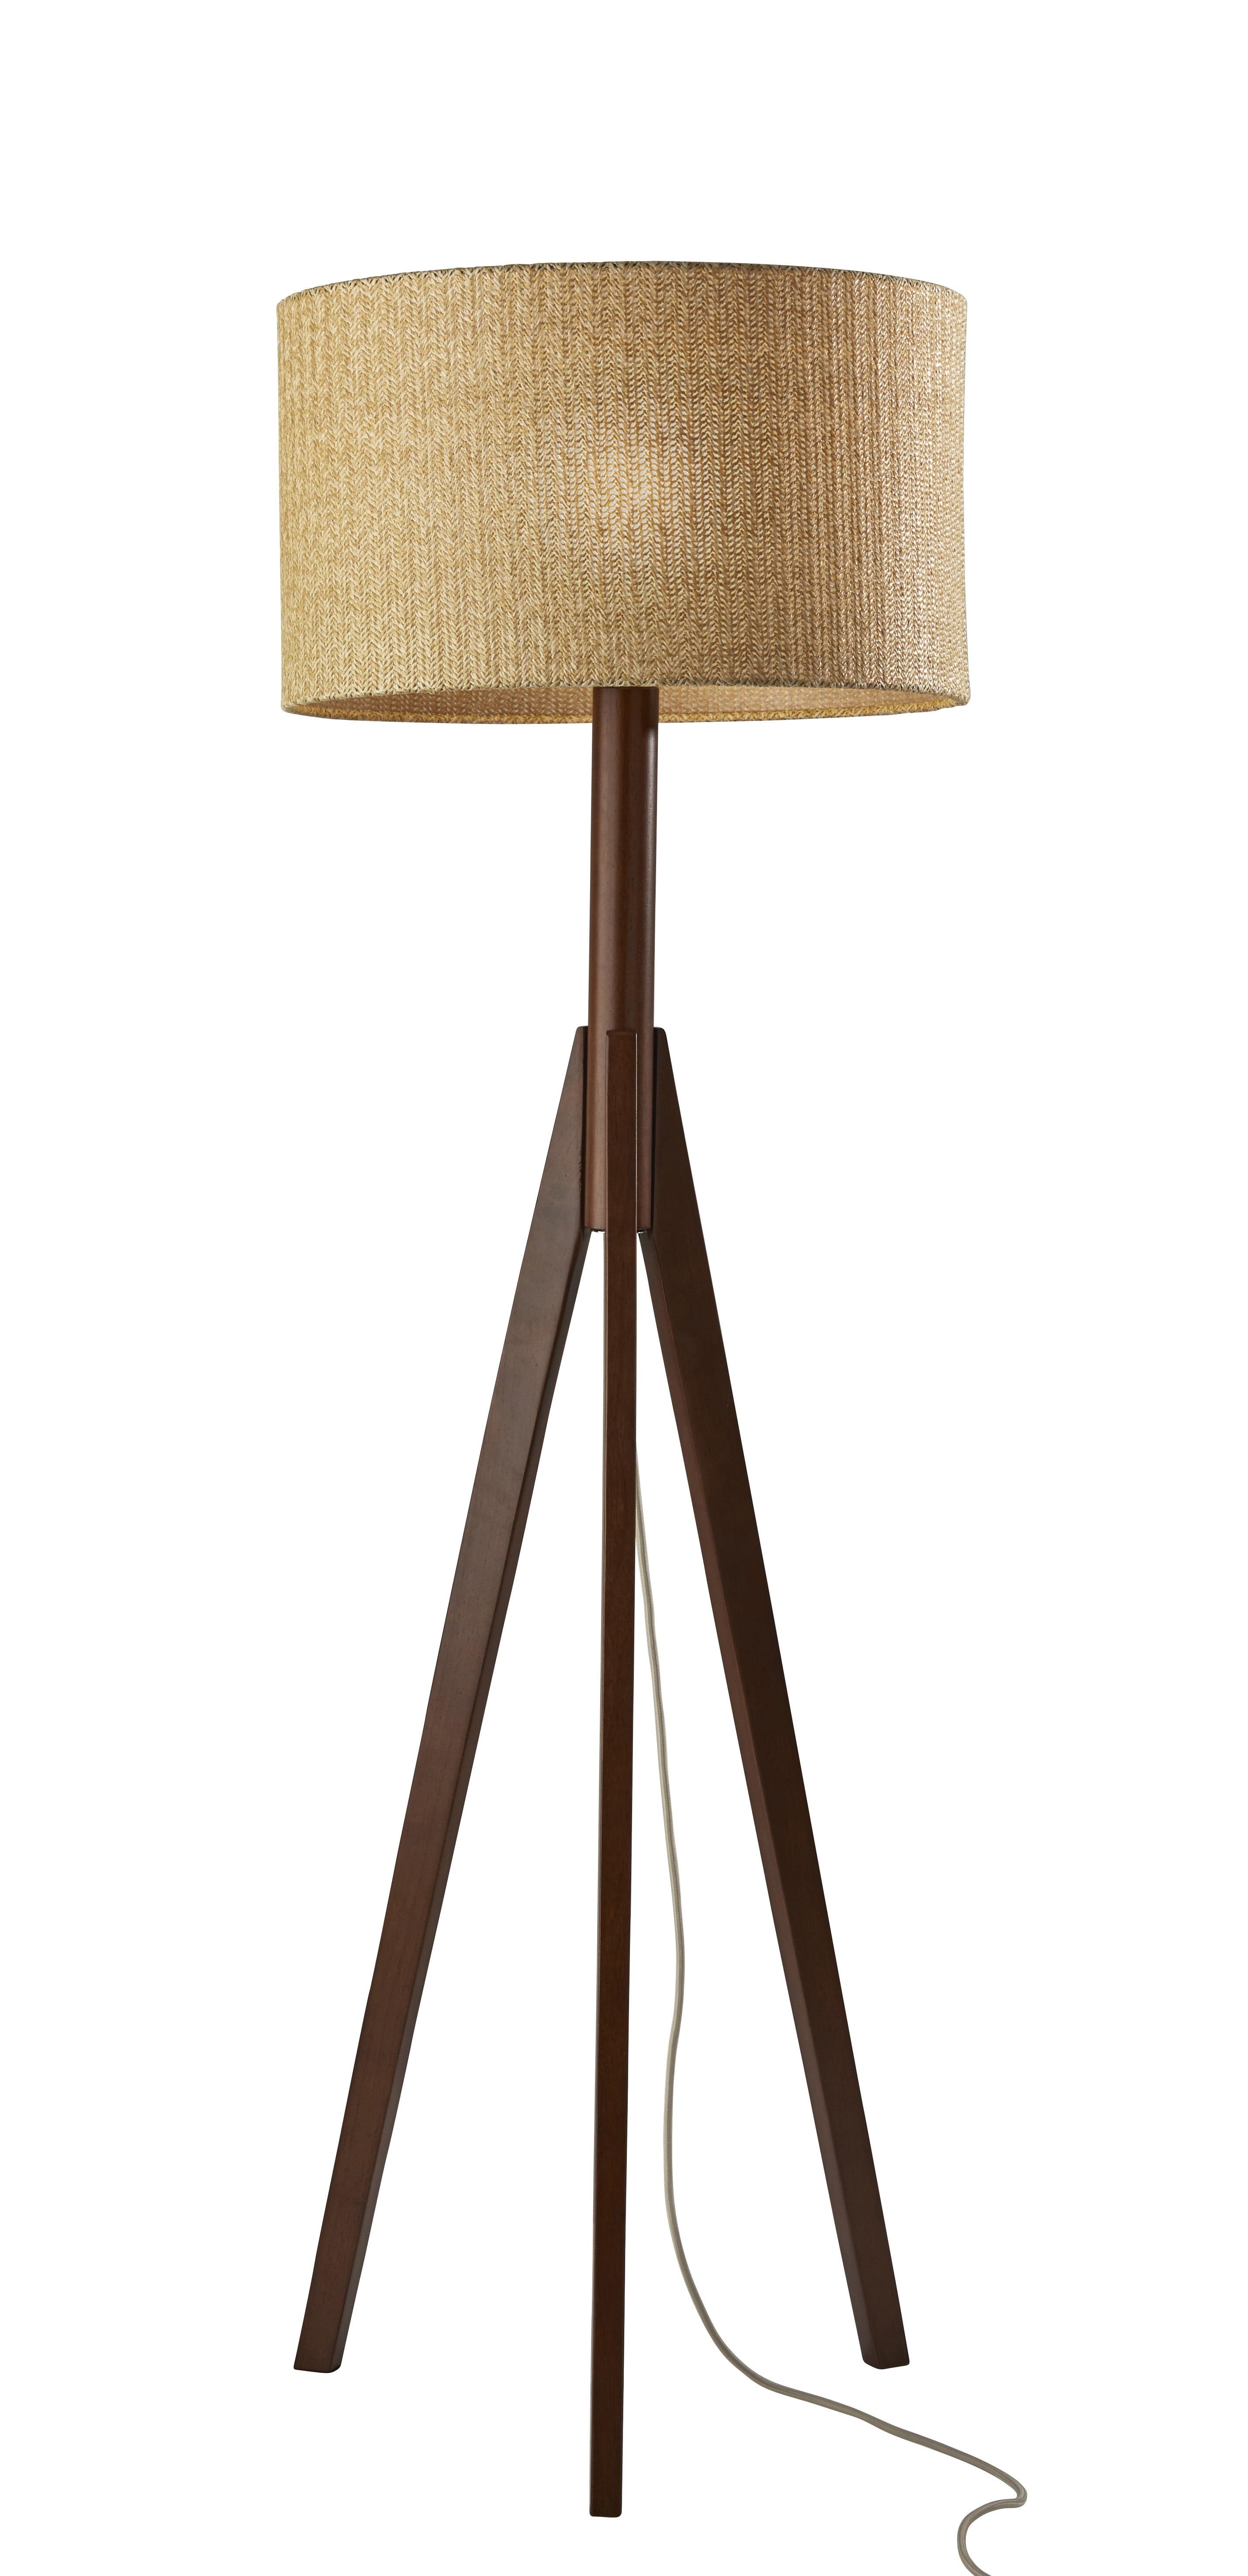 Sustainable Walnut Tripod Floor Lamp with Woven Paper Shade